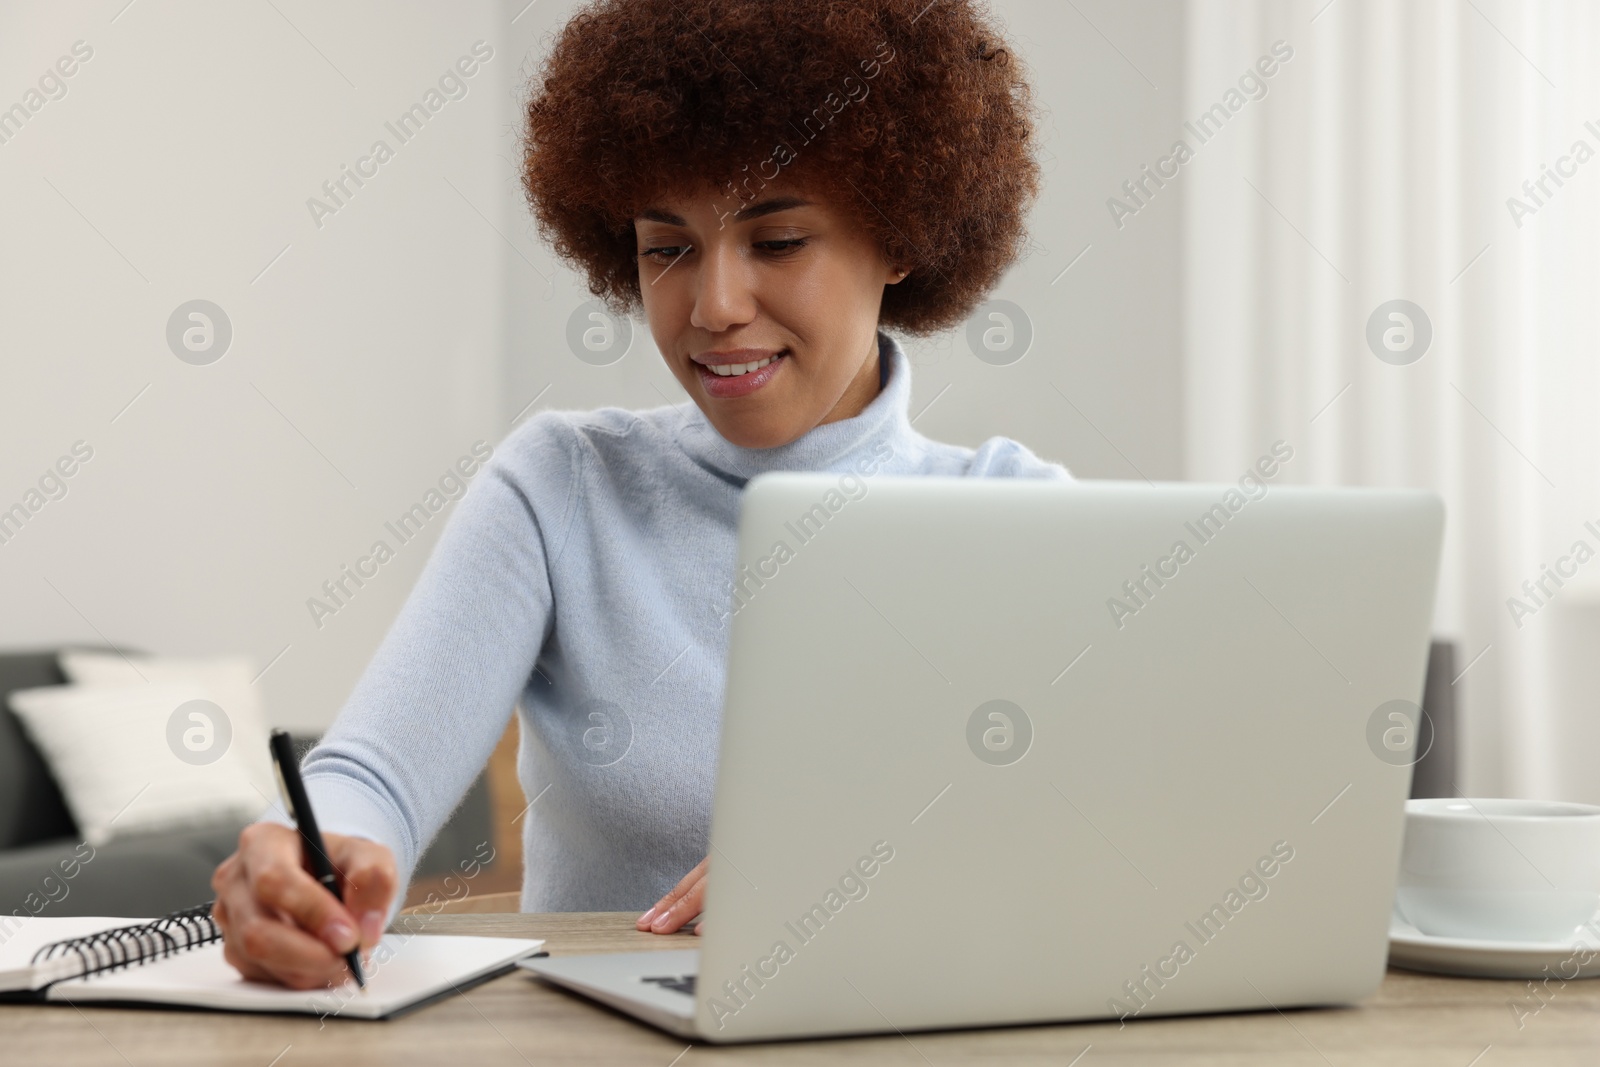 Photo of Beautiful young woman using laptop and writing in notebook at wooden desk in room